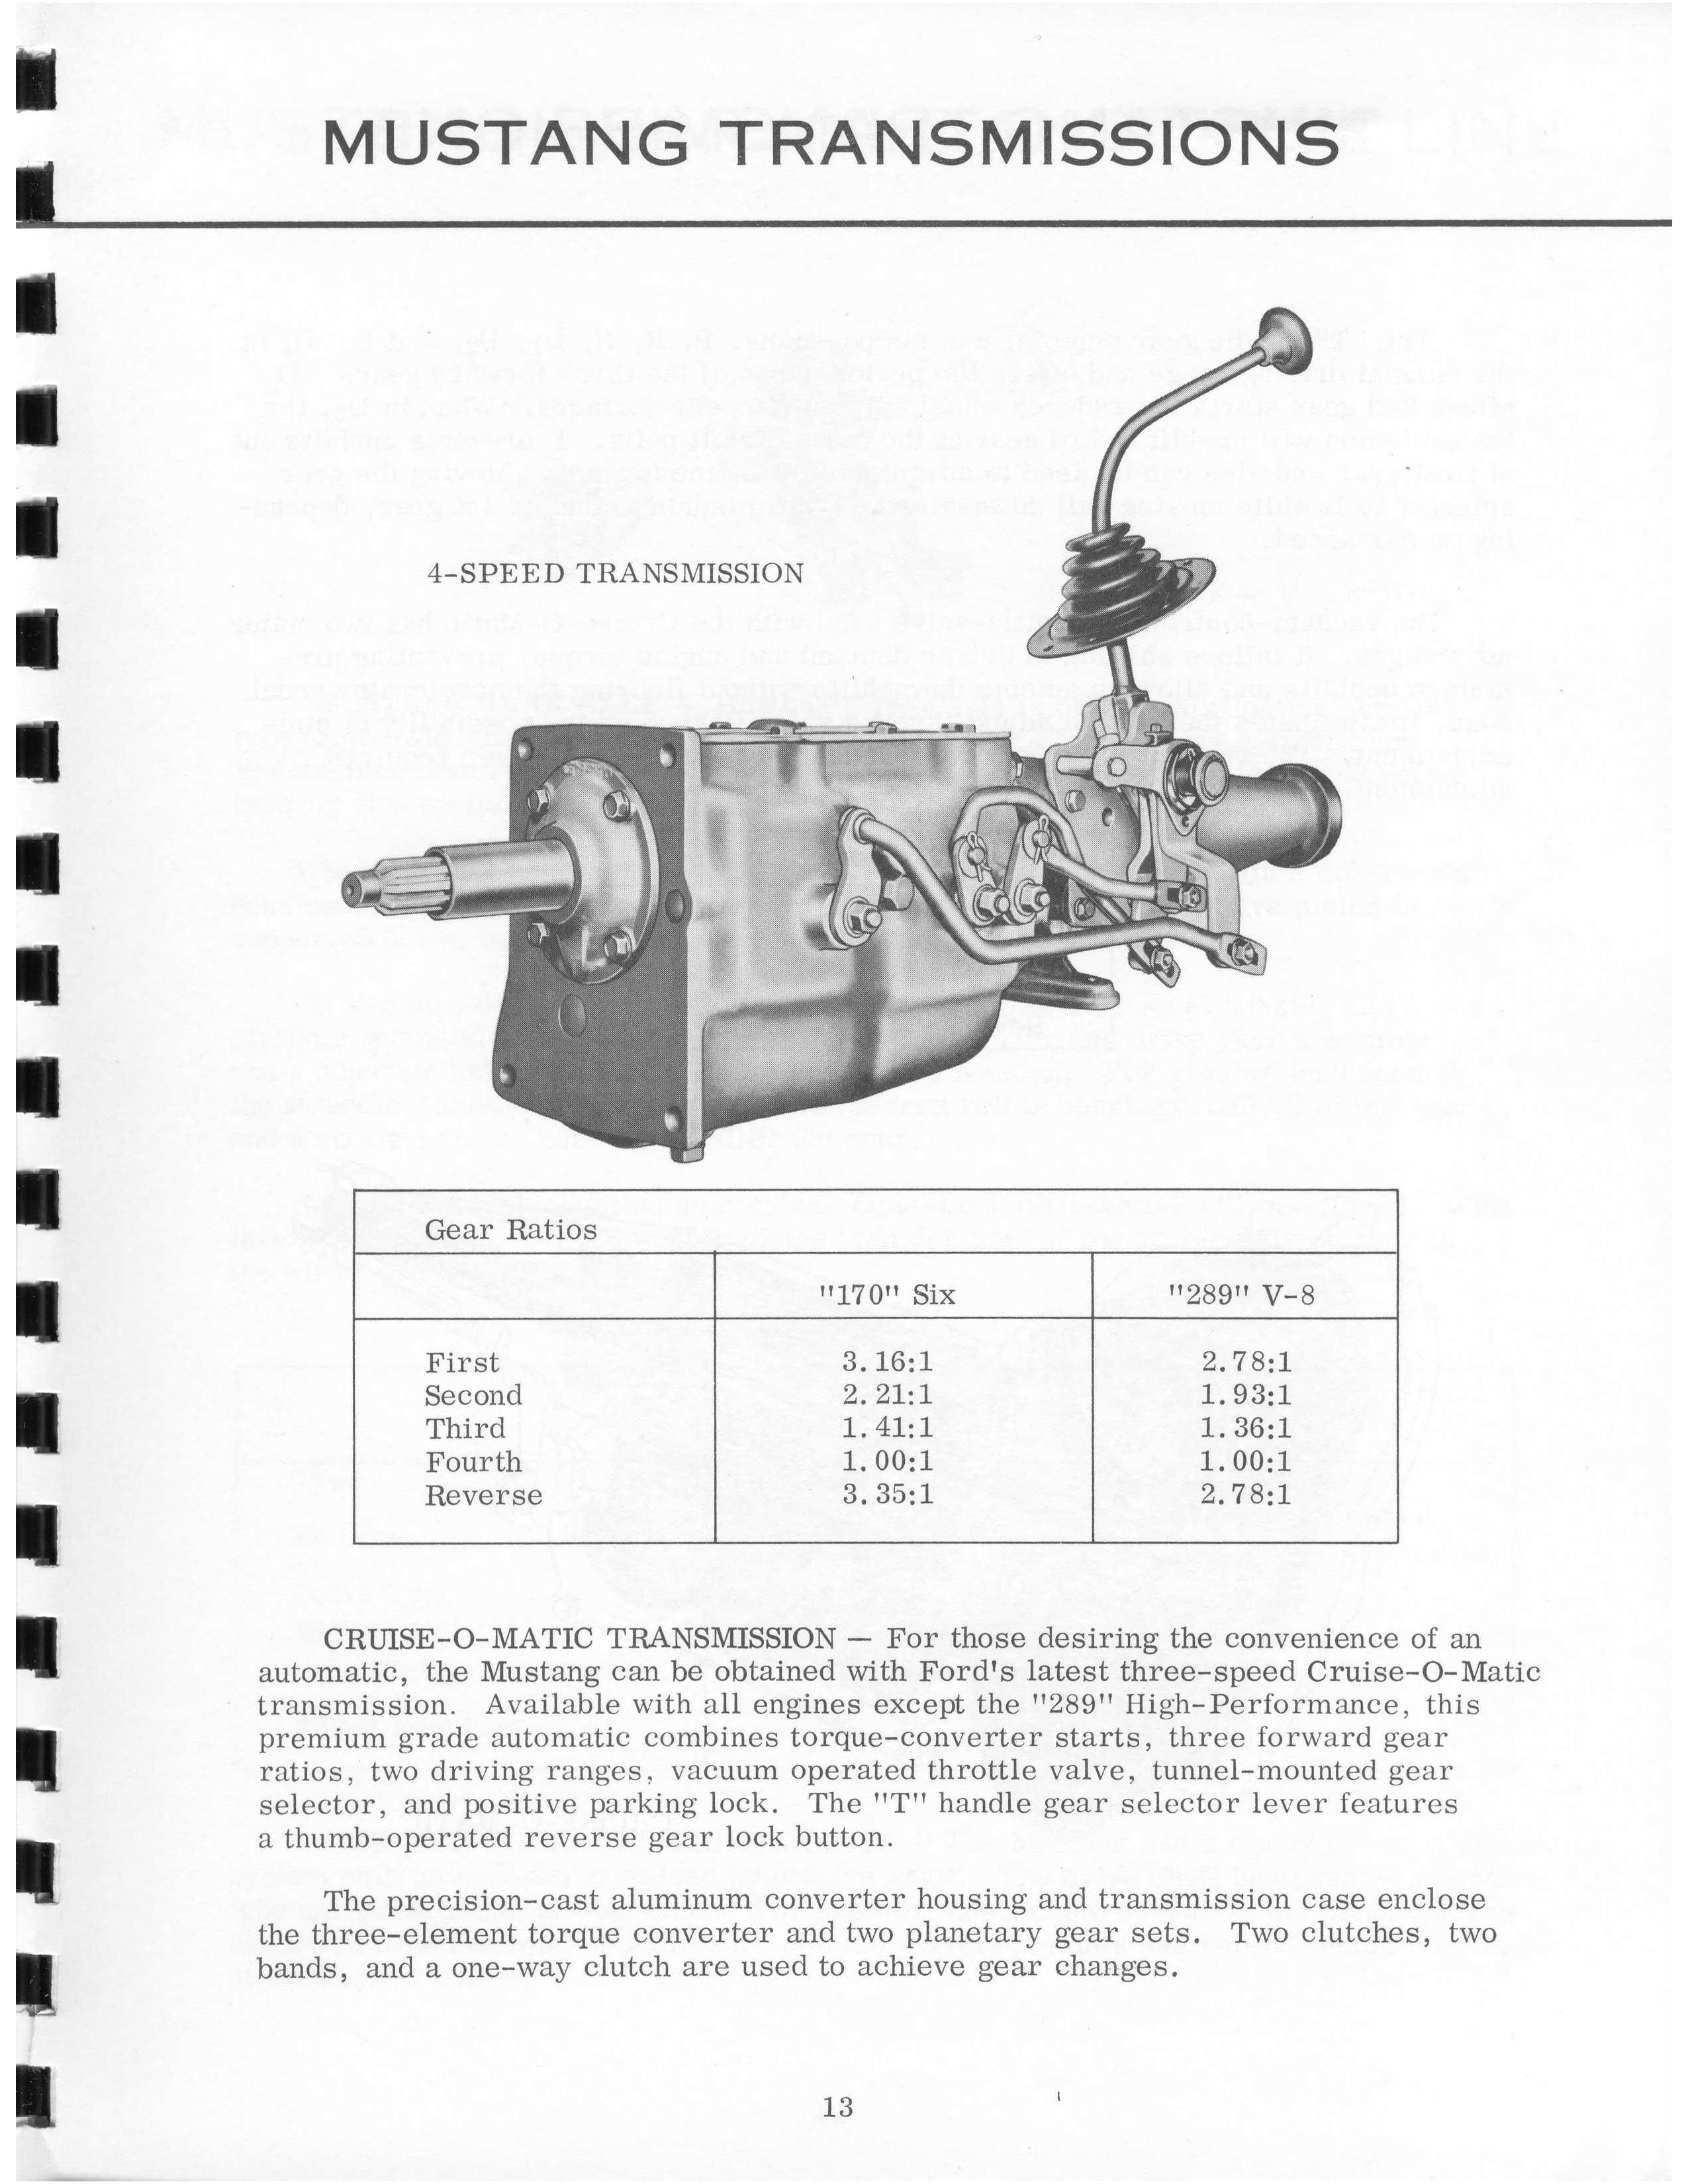 1964_Ford_Mustang_Press_Packet-13